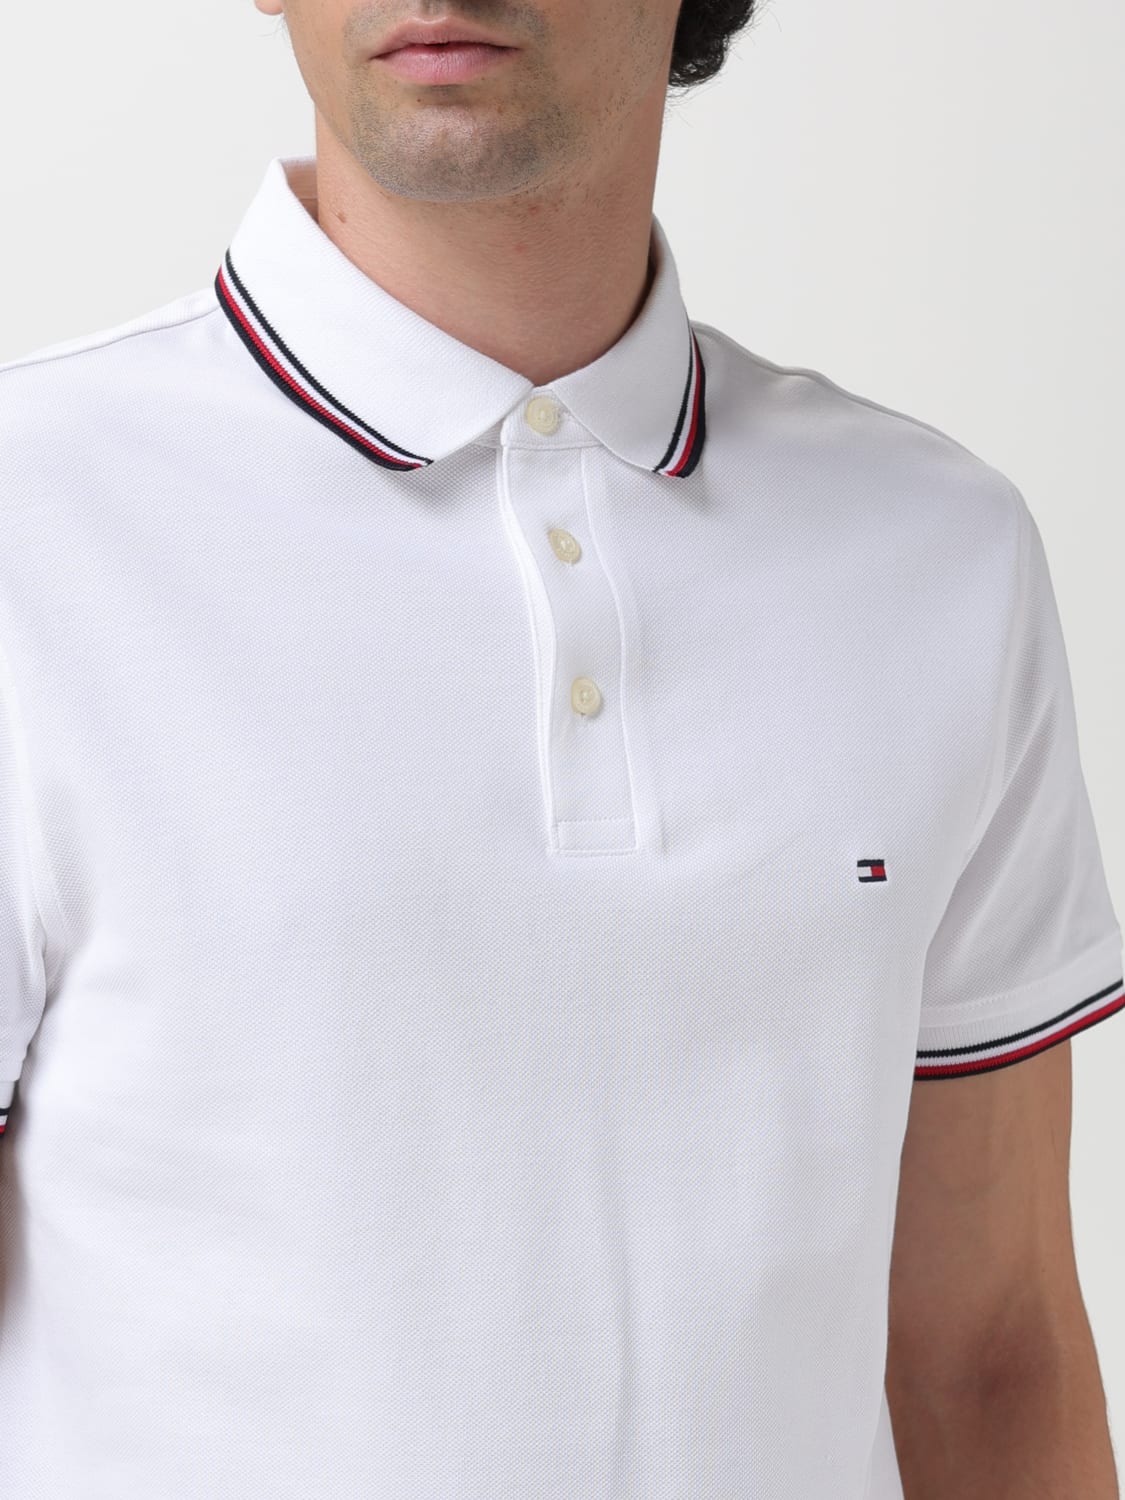 TOMMY HILFIGER: polo shirt in cotton pique - White  Tommy Hilfiger polo  shirt MW0MW30750 online at